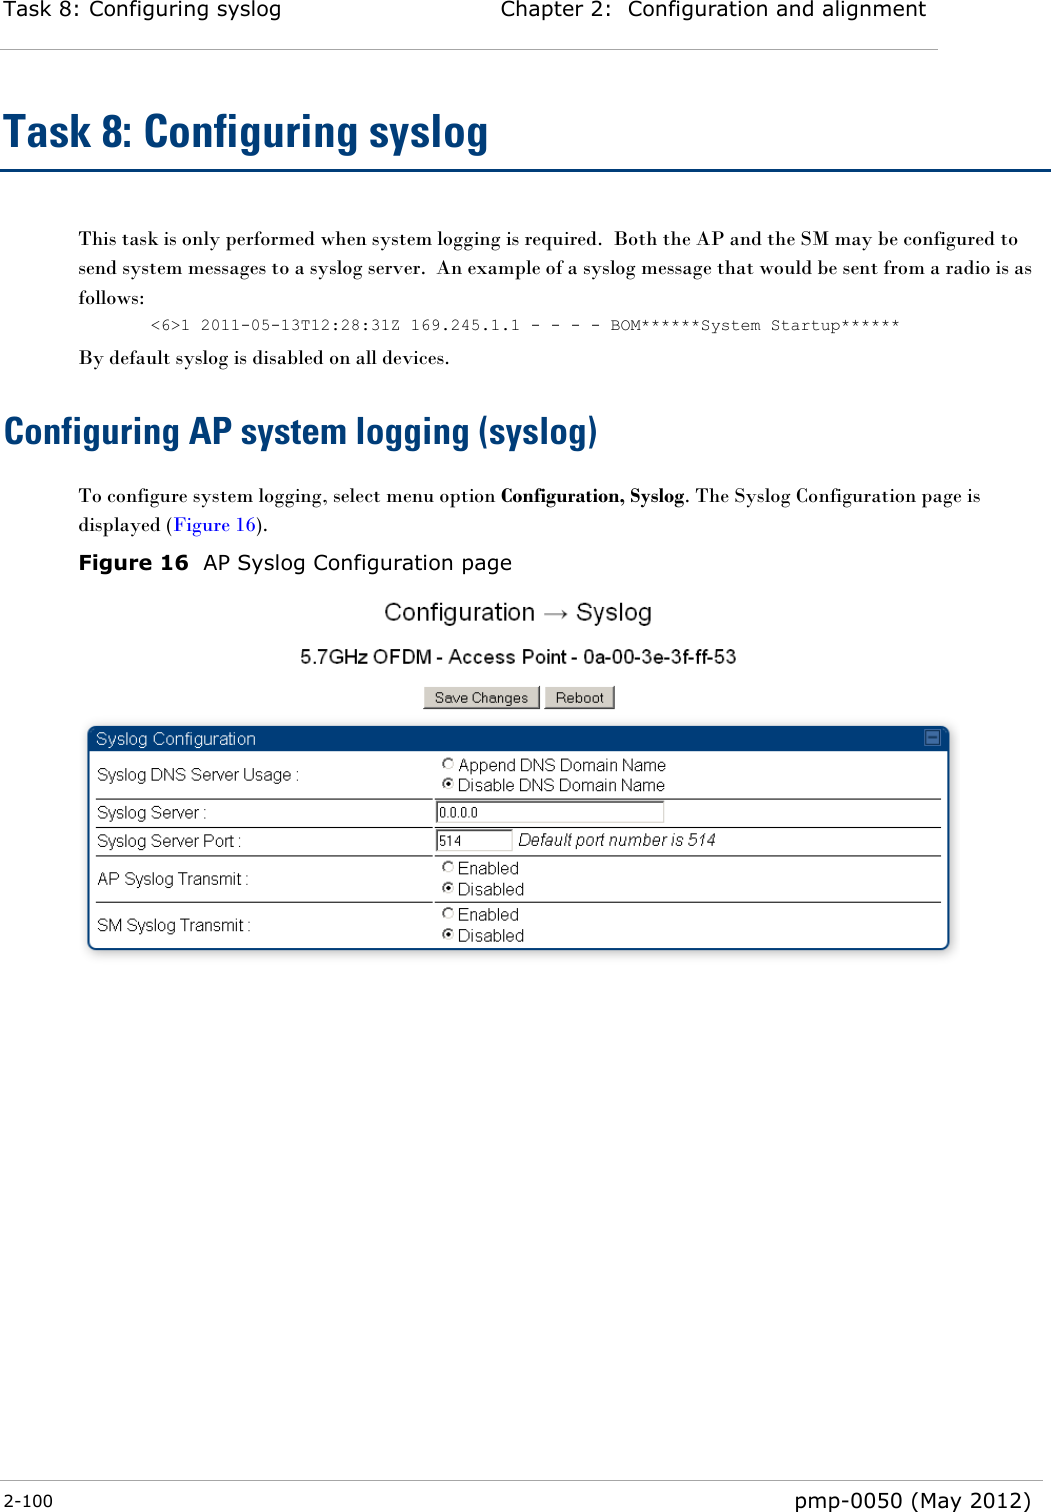 Task 8: Configuring syslog Chapter 2:  Configuration and alignment  2-100  pmp-0050 (May 2012)  Task 8: Configuring syslog This task is only performed when system logging is required.  Both the AP and the SM may be configured to send system messages to a syslog server.  An example of a syslog message that would be sent from a radio is as follows: &lt;6&gt;1 2011-05-13T12:28:31Z 169.245.1.1 - - - - BOM******System Startup****** By default syslog is disabled on all devices. Configuring AP system logging (syslog) To configure system logging, select menu option Configuration, Syslog. The Syslog Configuration page is displayed (Figure 16).  Figure 16  AP Syslog Configuration page  